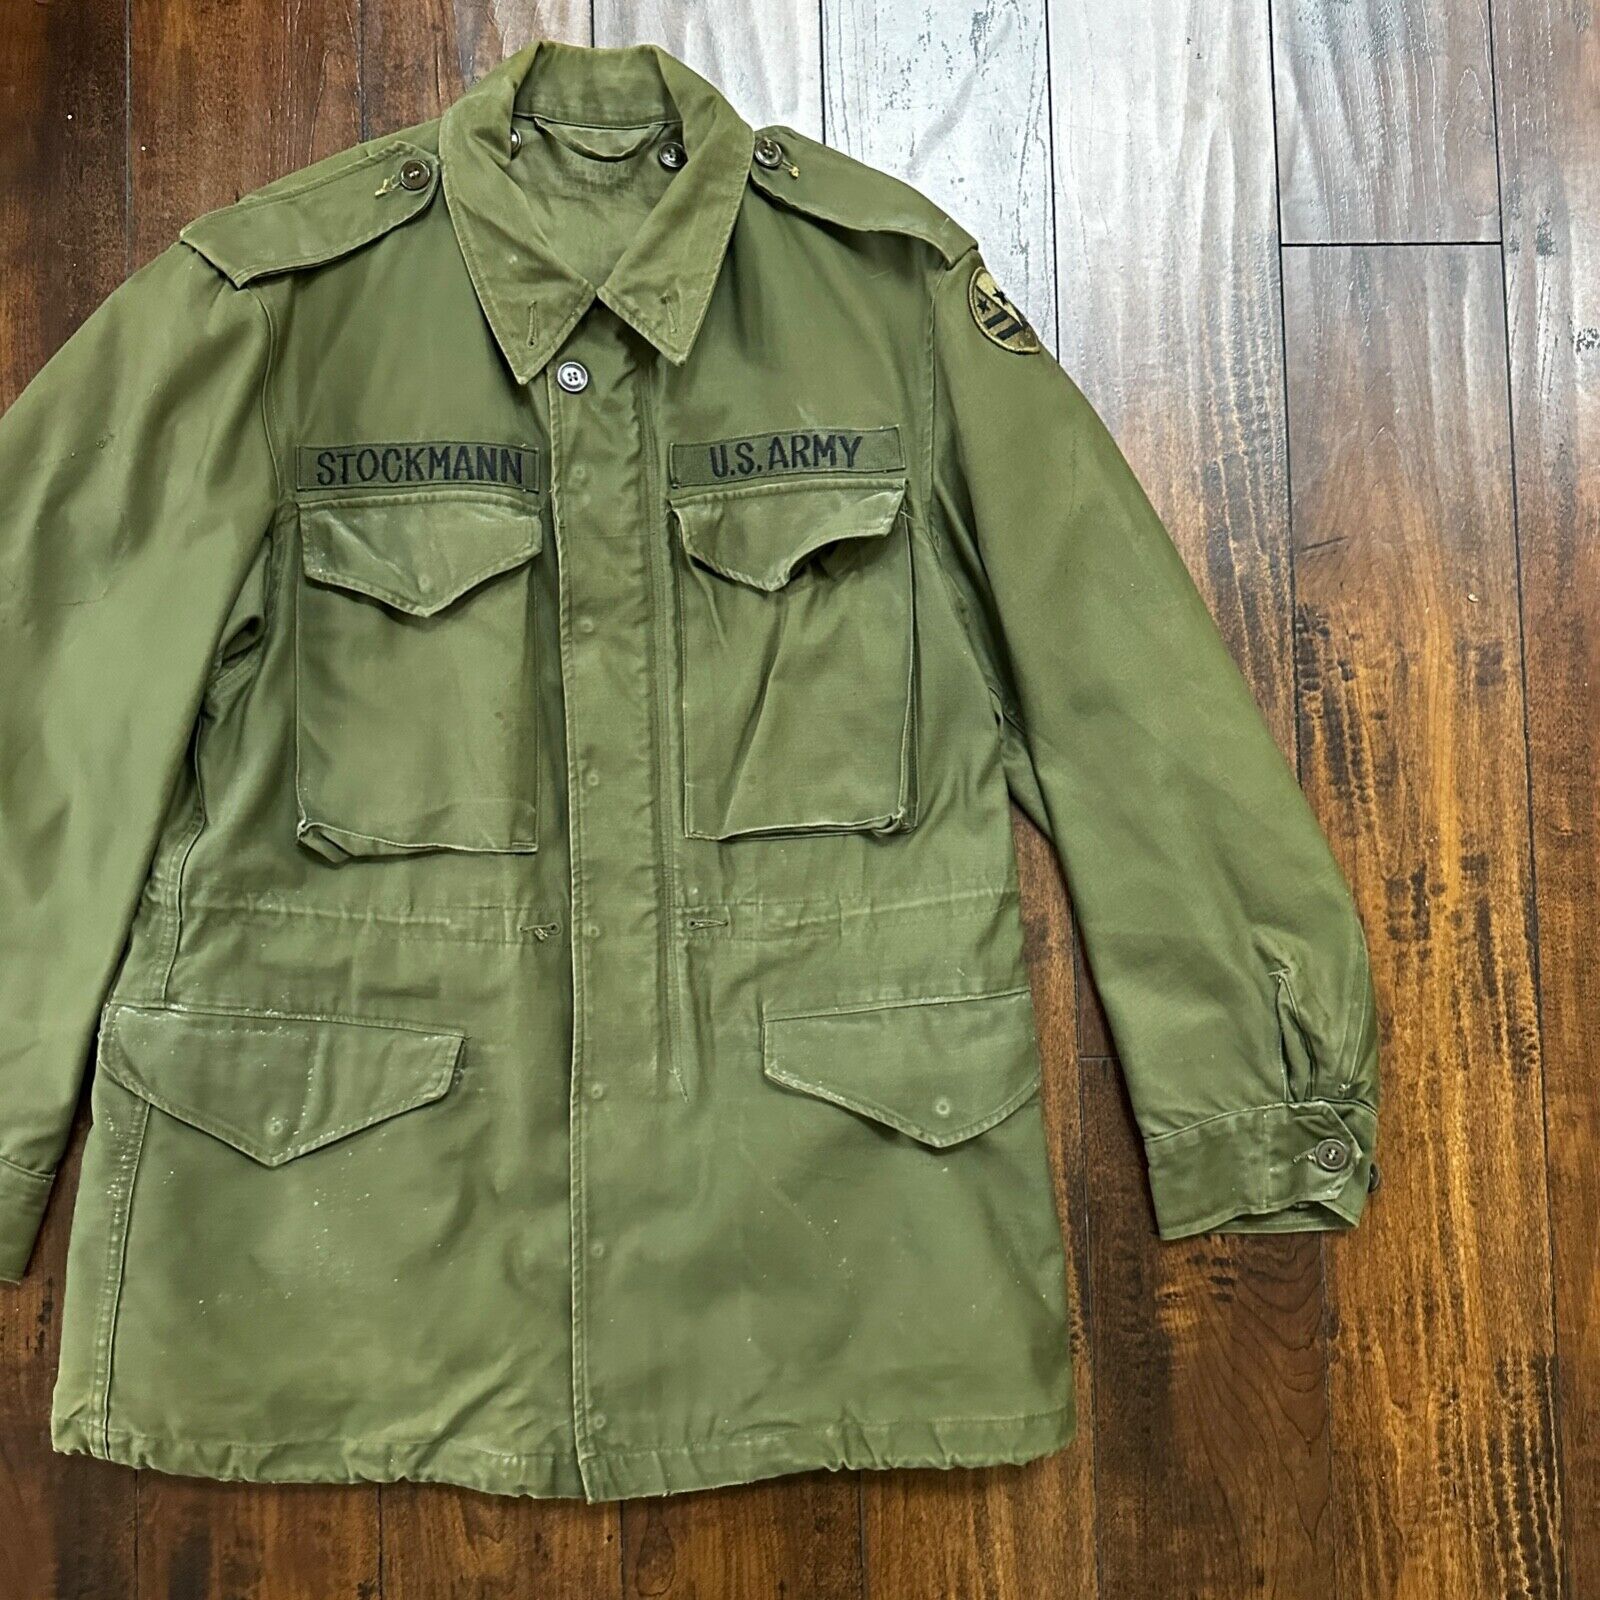 VTG 50s M-51 Field Jacket Military US Army Coat M-1951 S OG-107 WWII 1950s